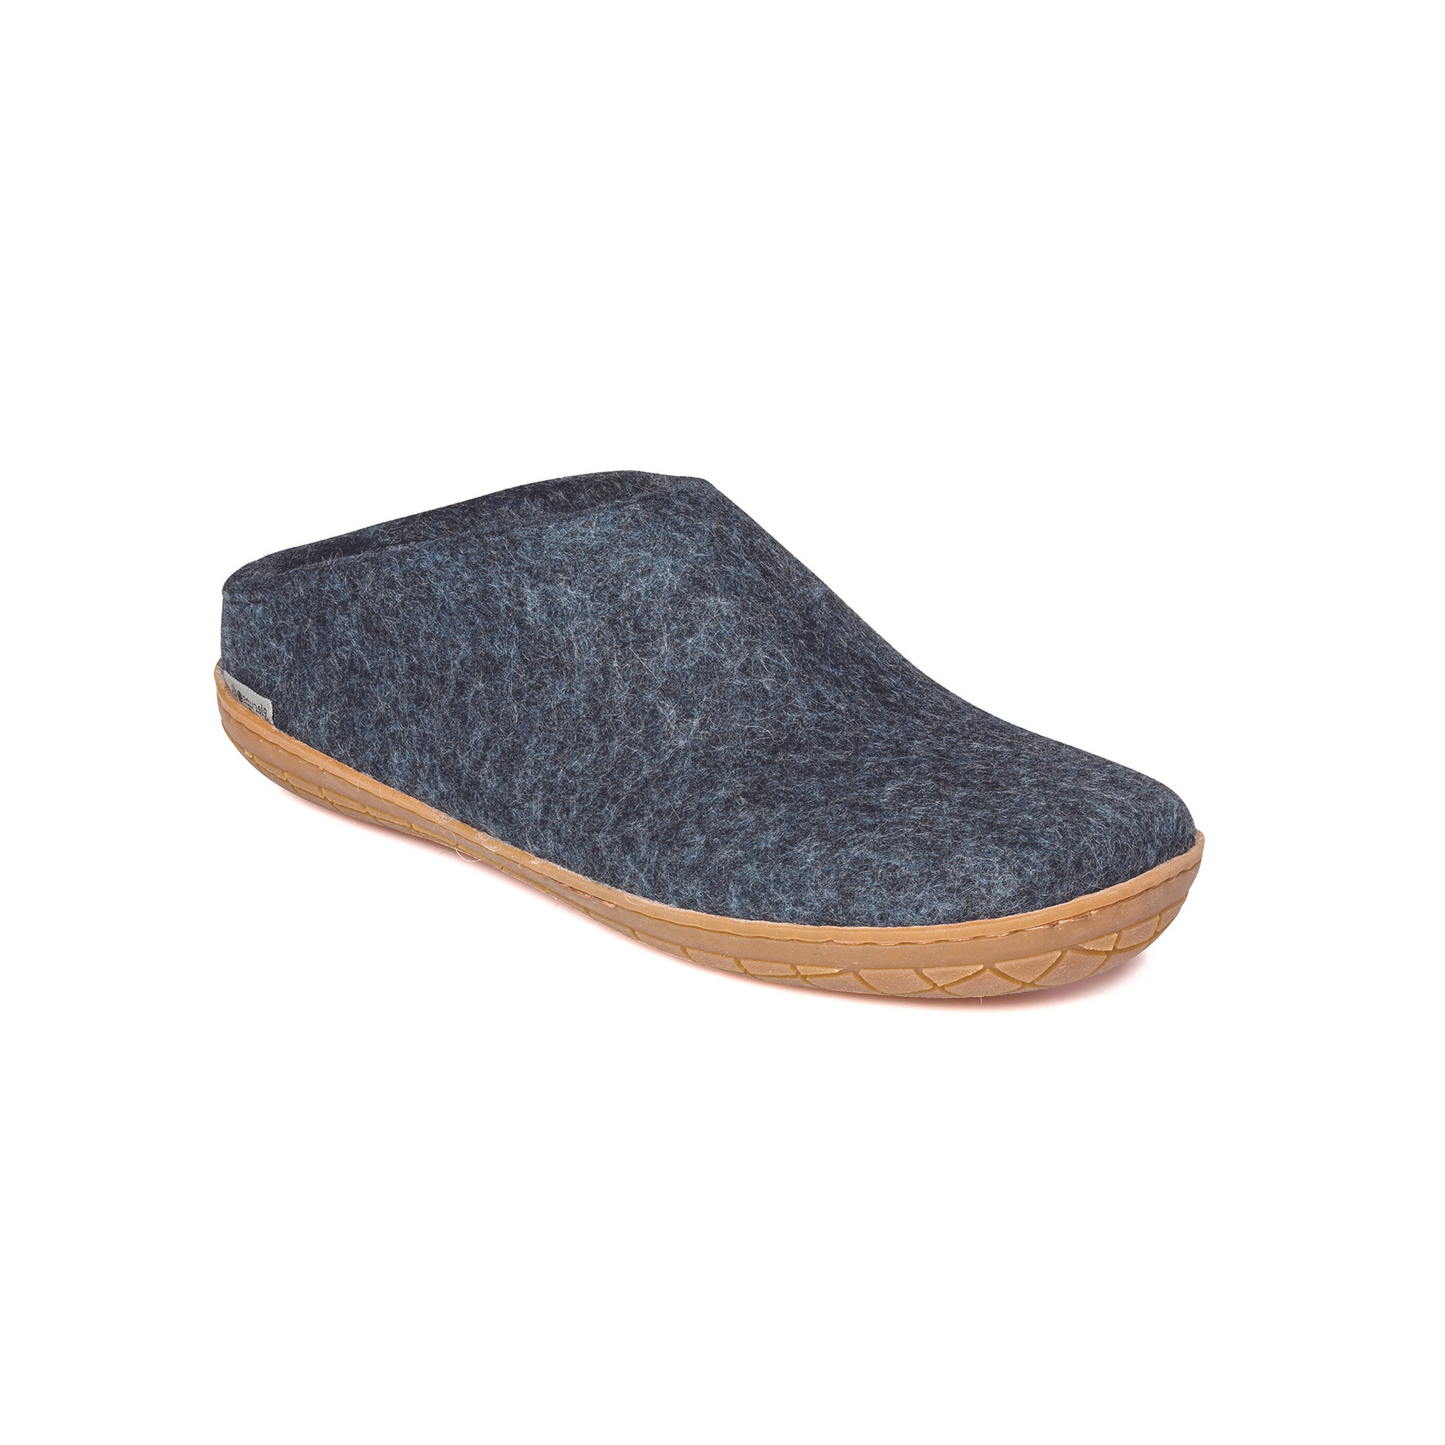 A felted denim-blue slipper pictured at a slight angle, showing part of the top front and side of the slipper. A caramel textured rubber sole lines the bottom of the shoe with a row of stitching.